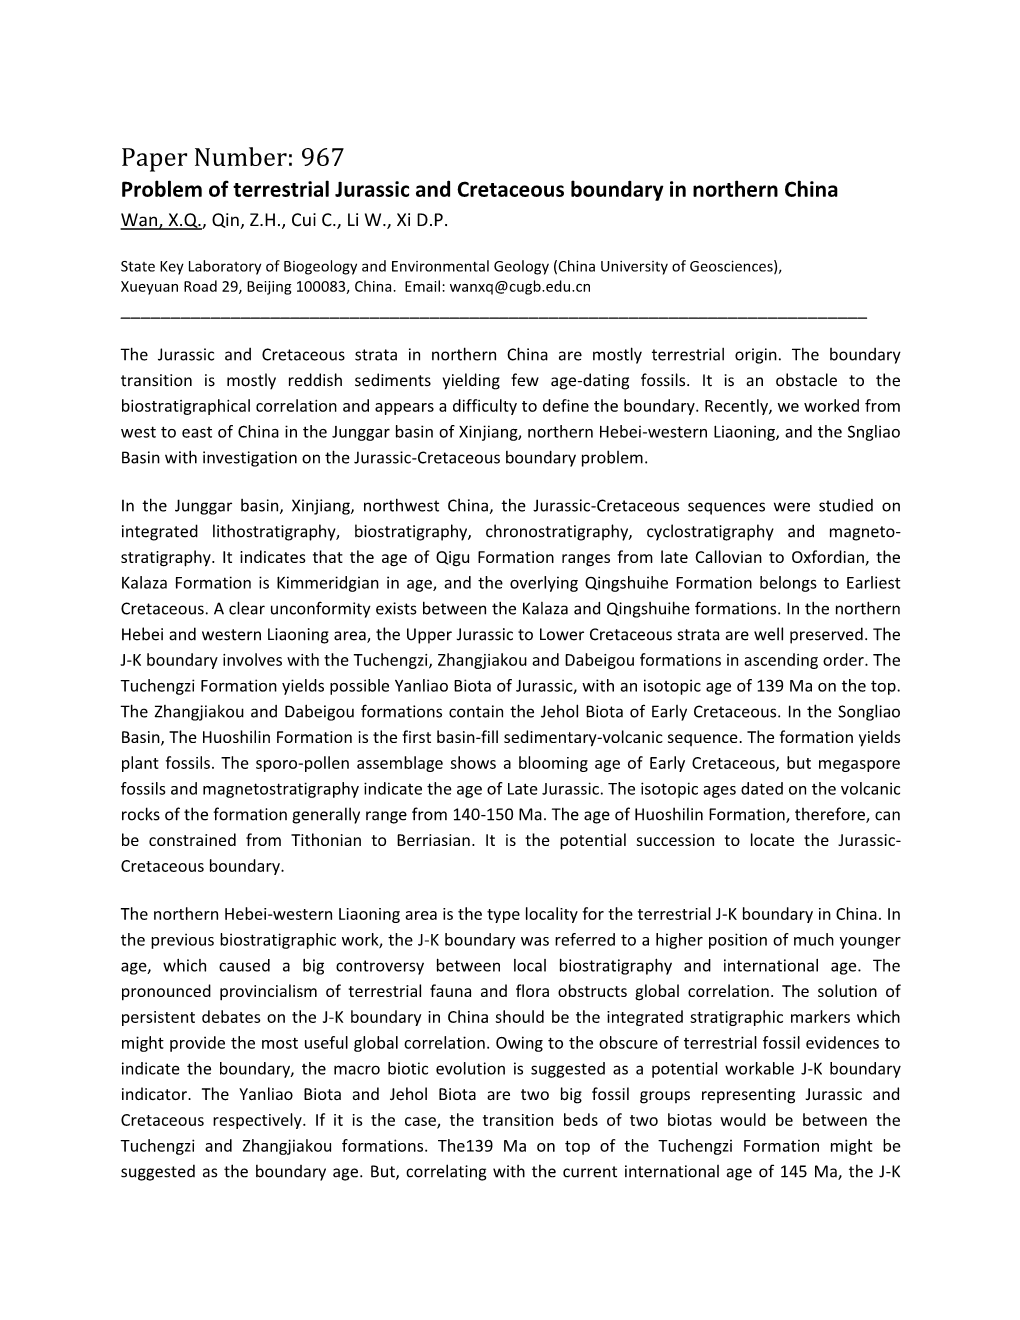 Paper Number: 967 Problem of Terrestrial Jurassic and Cretaceous Boundary in Northern China Wan, X.Q., Qin, Z.H., Cui C., Li W., Xi D.P